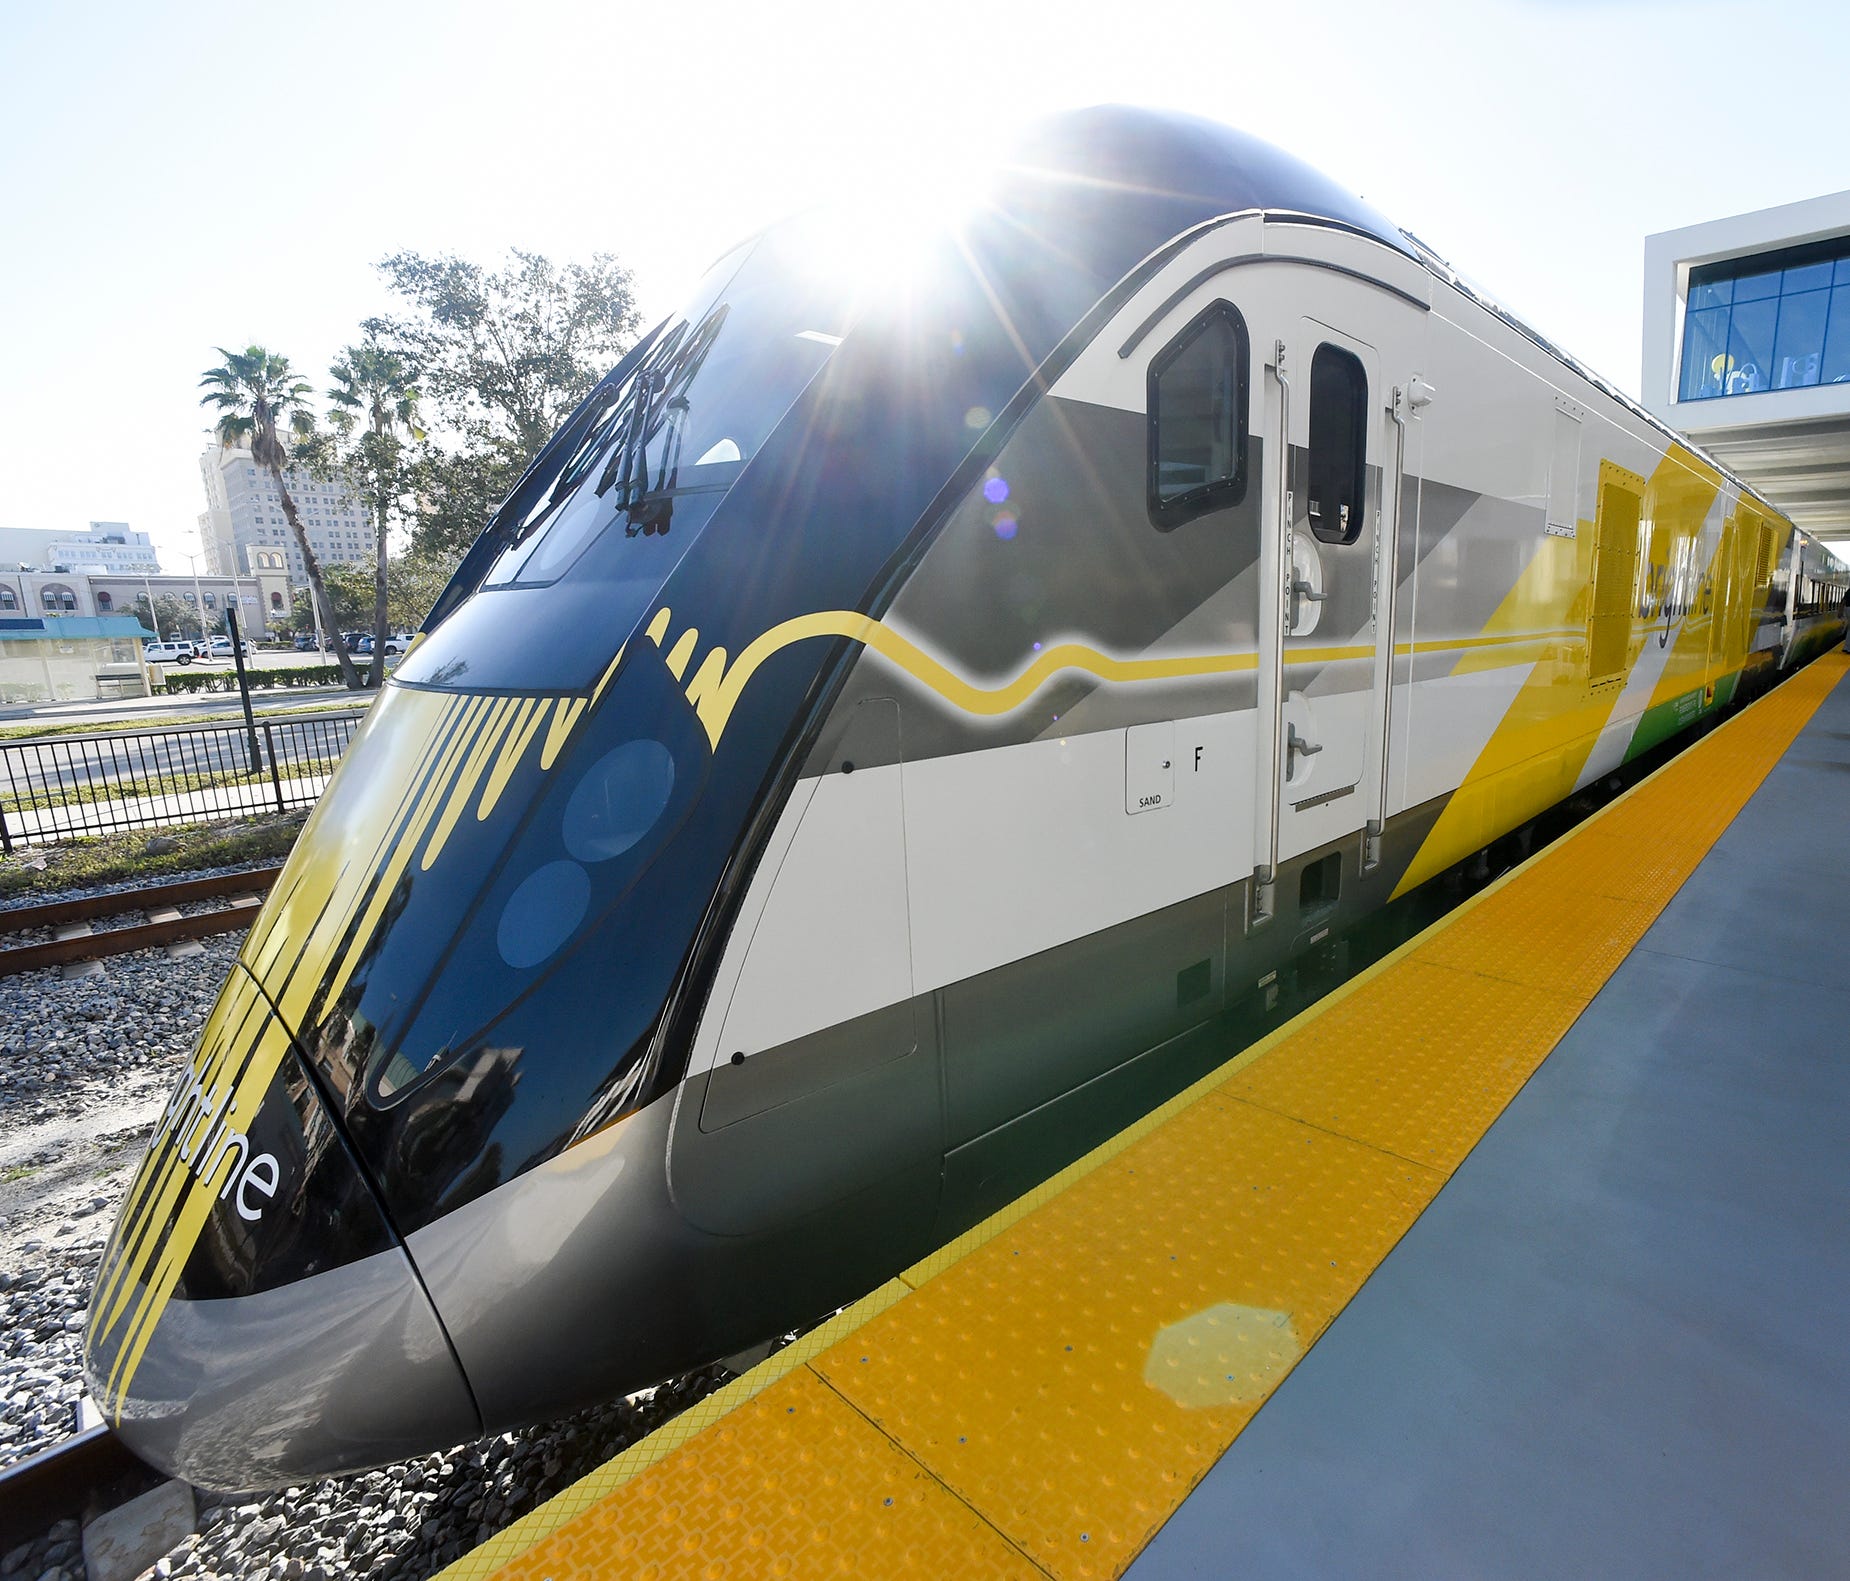 Brightline executives, elected officials and media personnel made the introductory trip between West Palm Beach and Fort Lauderdale Friday, Jan. 12, 2018, during an invitation-only media preview ride beginning and ending at the Brightline West Palm B